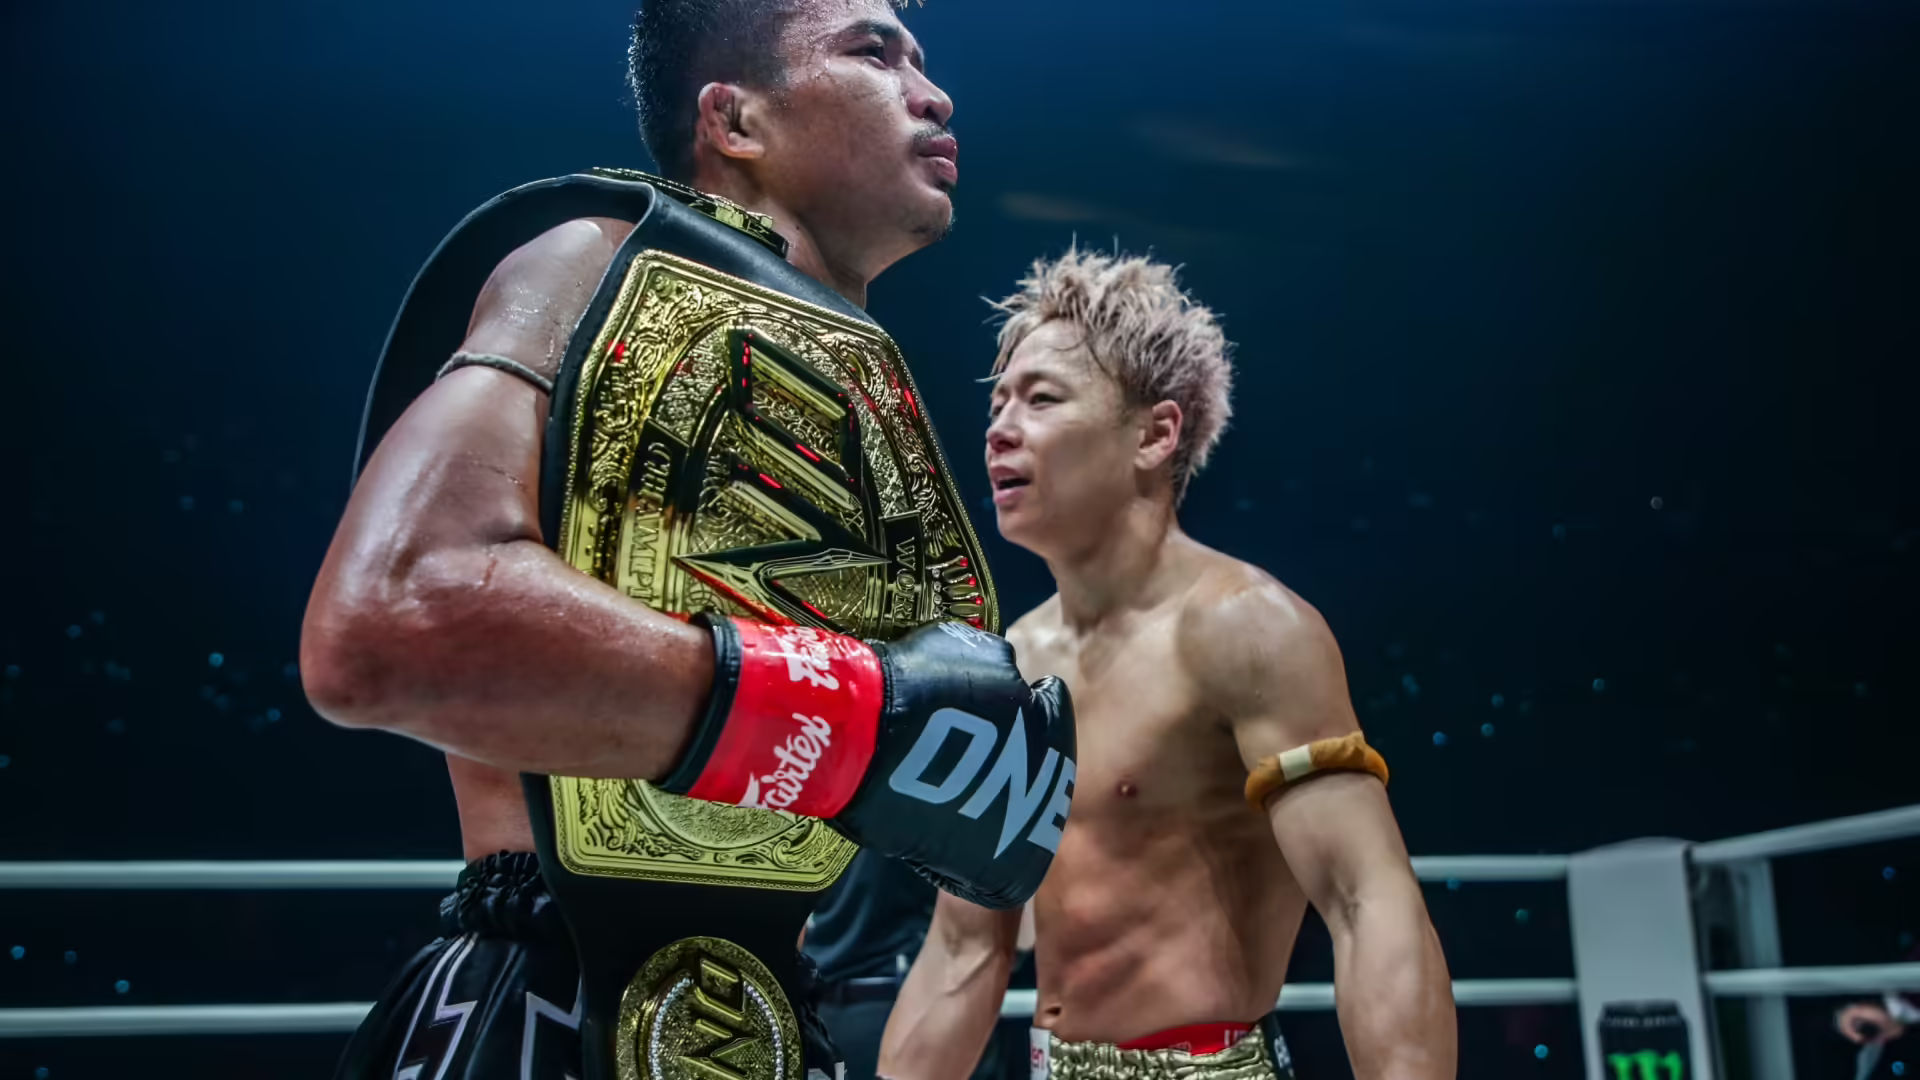 ONE 165 Results: Superlek edge out Takeru in the main event 